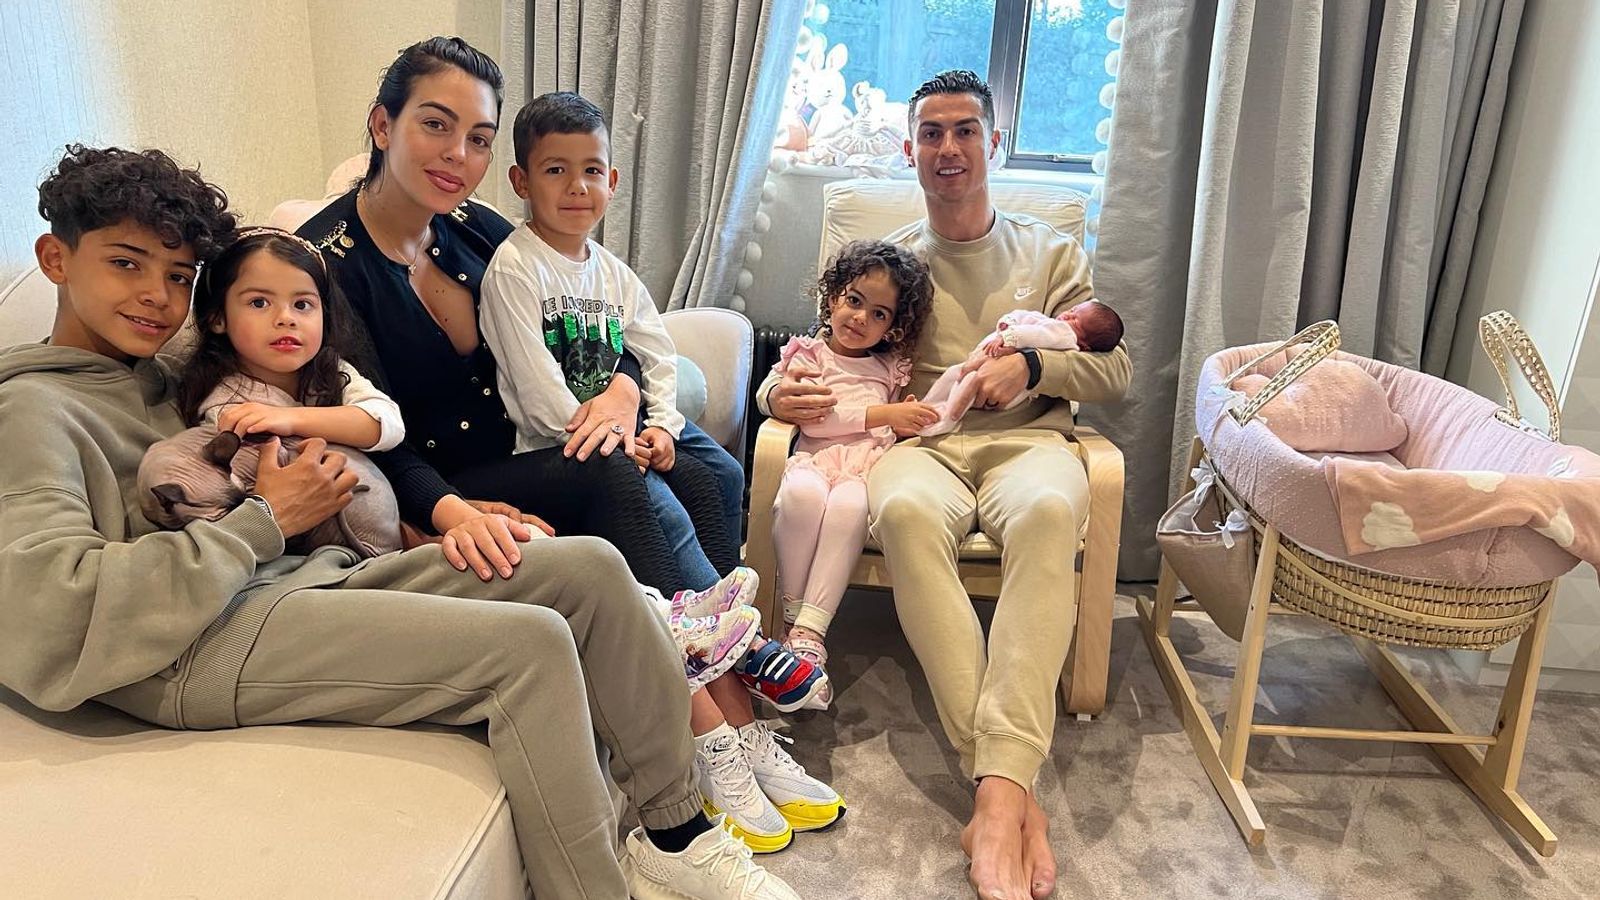 Cristiano  Ronaldo: Manchester United star shares moving picture of newborn girl after loss of her twin | UK News | Sky News